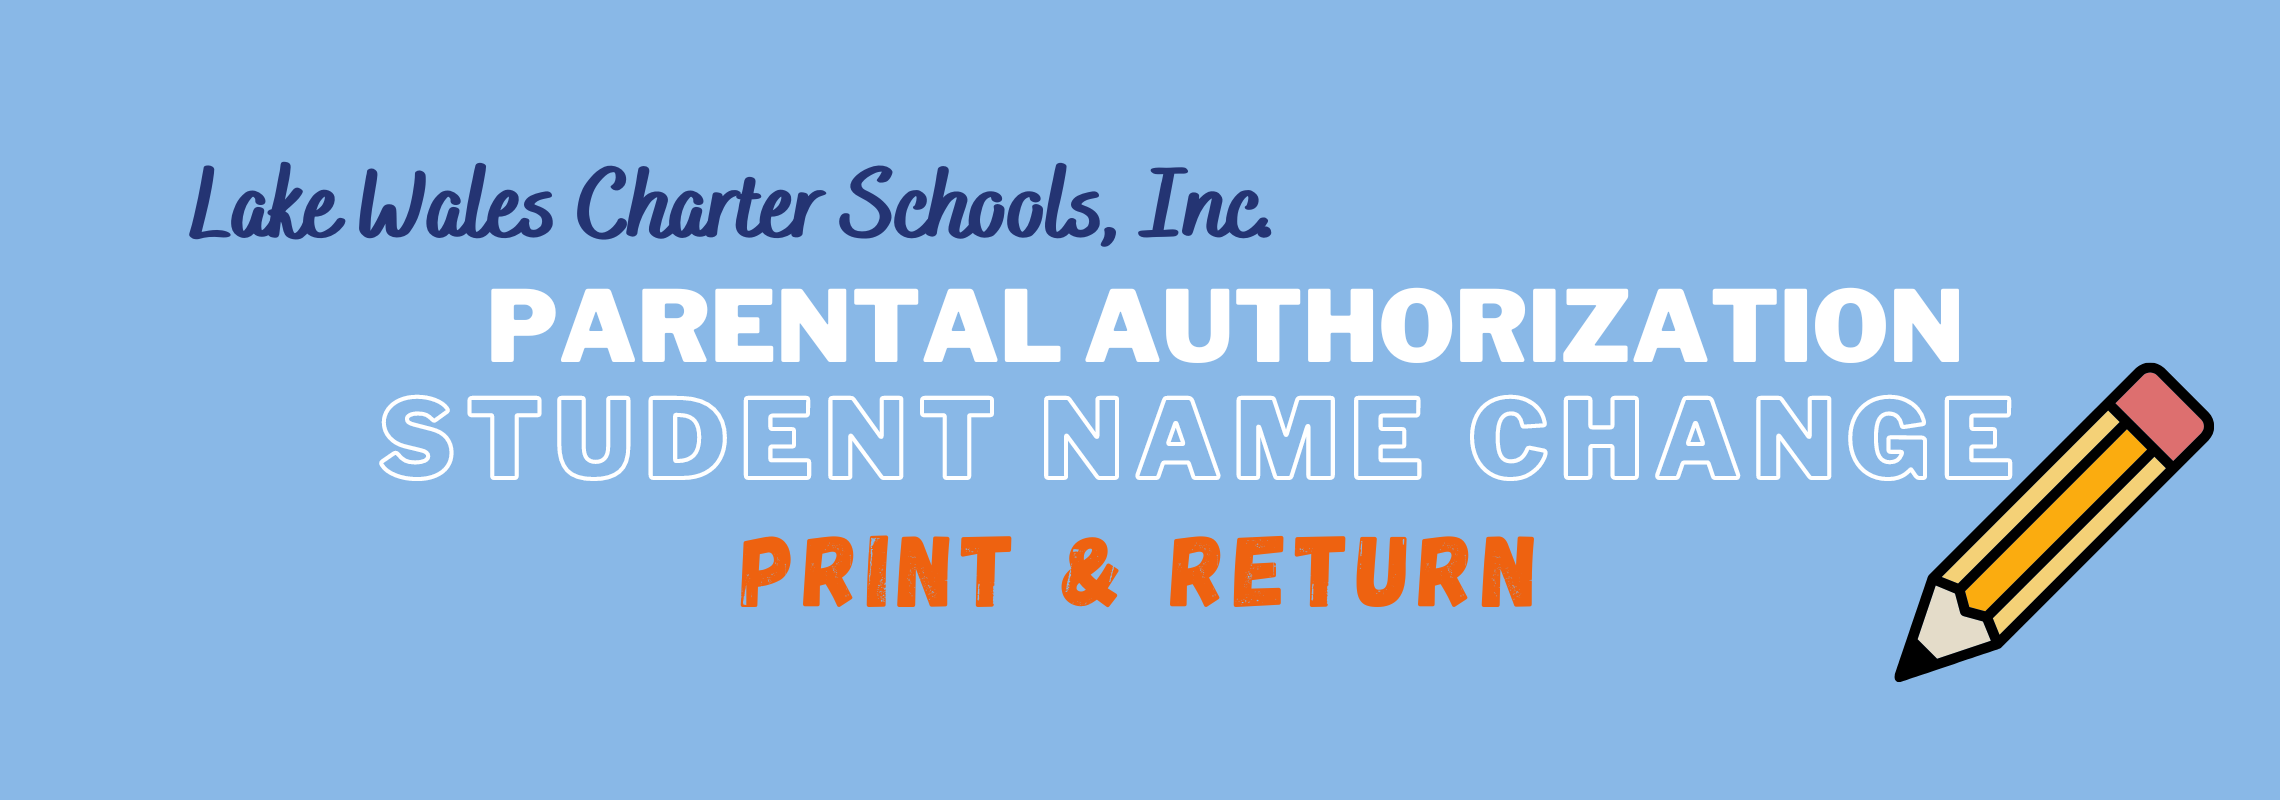 Parent Authorization for Name Change